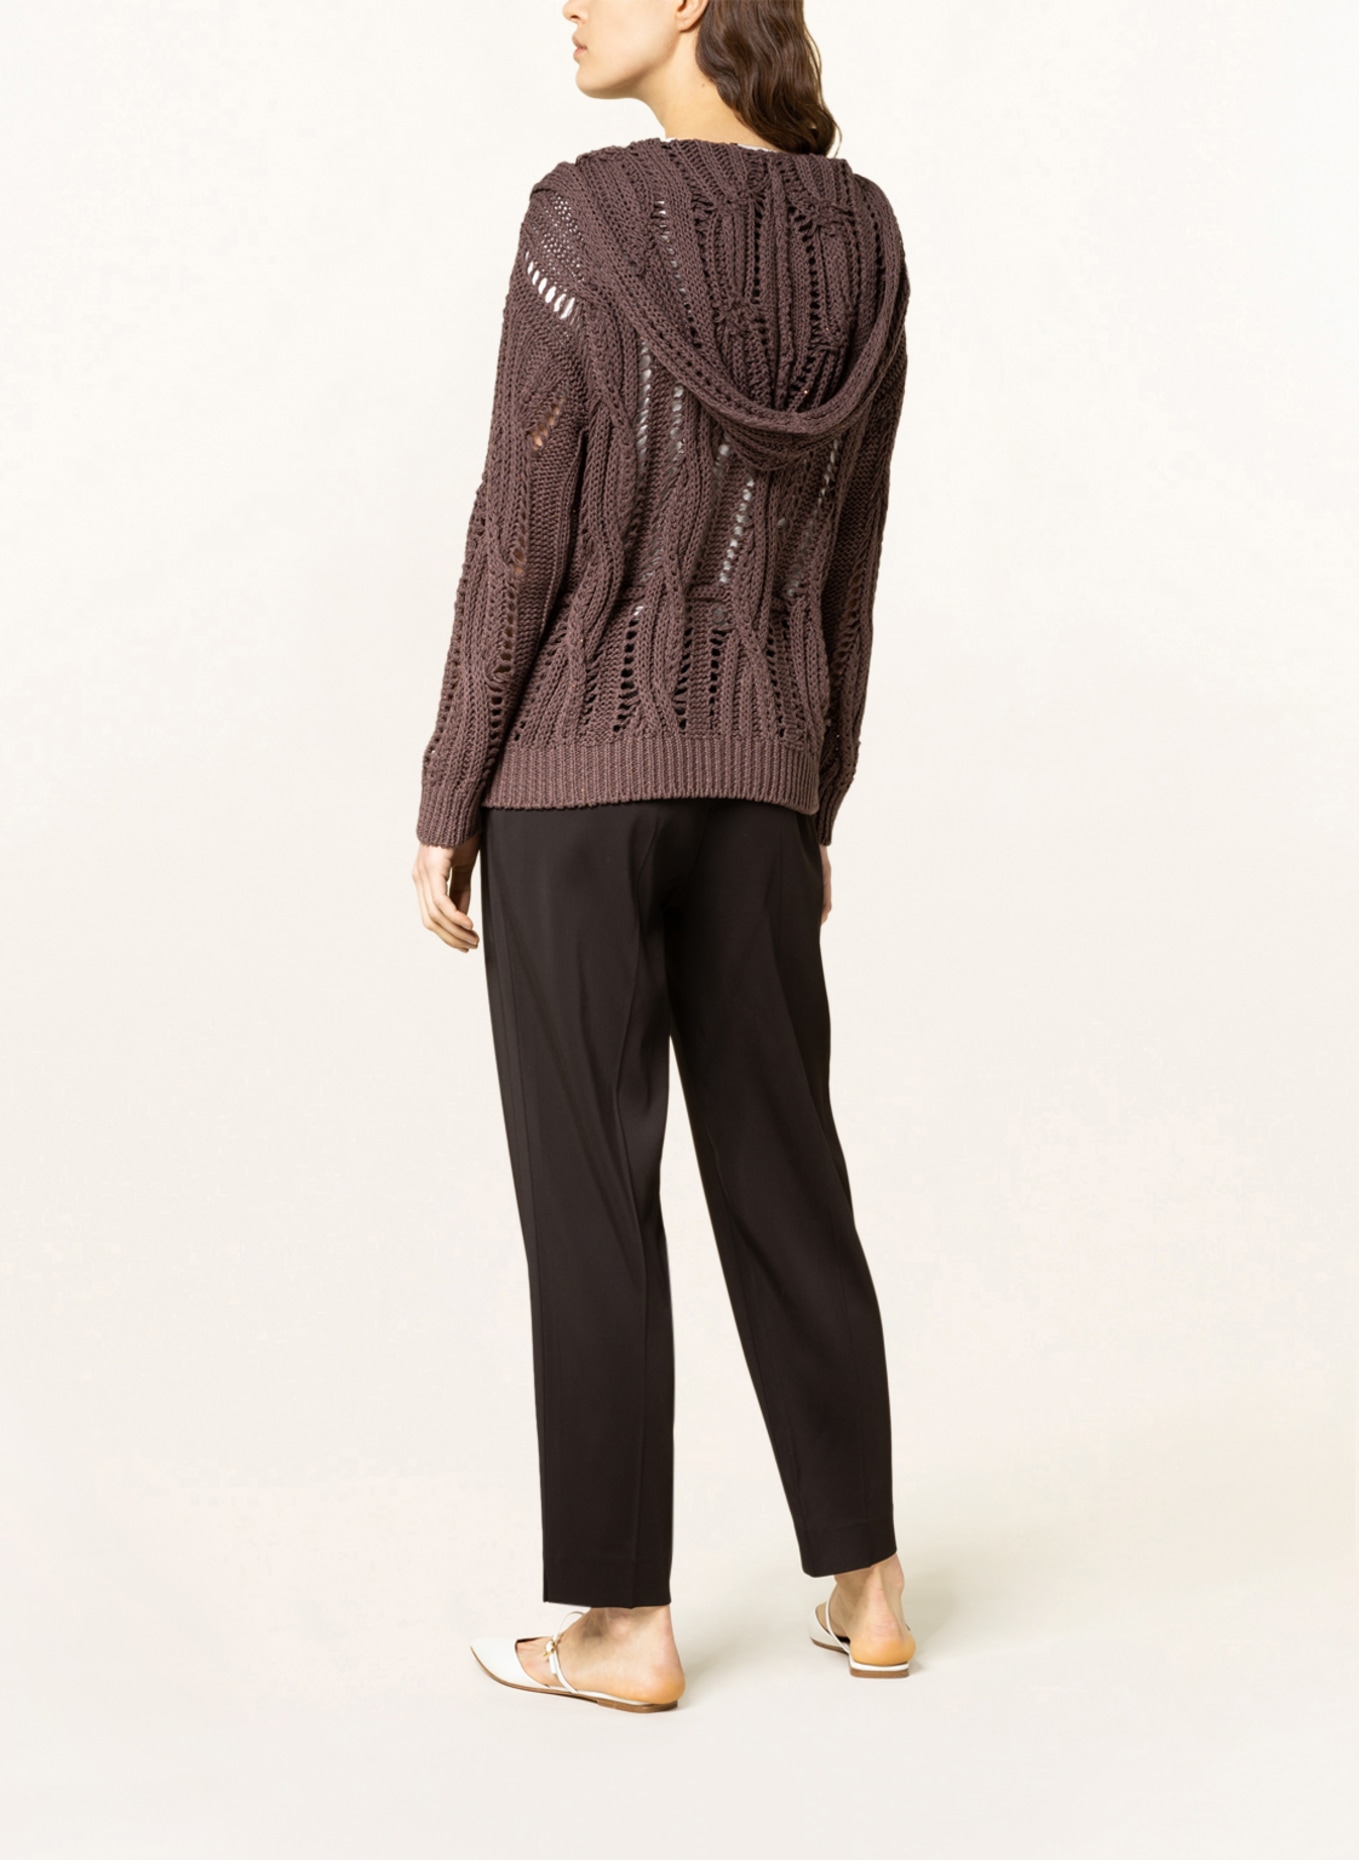 FABIANA FILIPPI Knit cardigan with sequins, Color: DARK BROWN (Image 3)